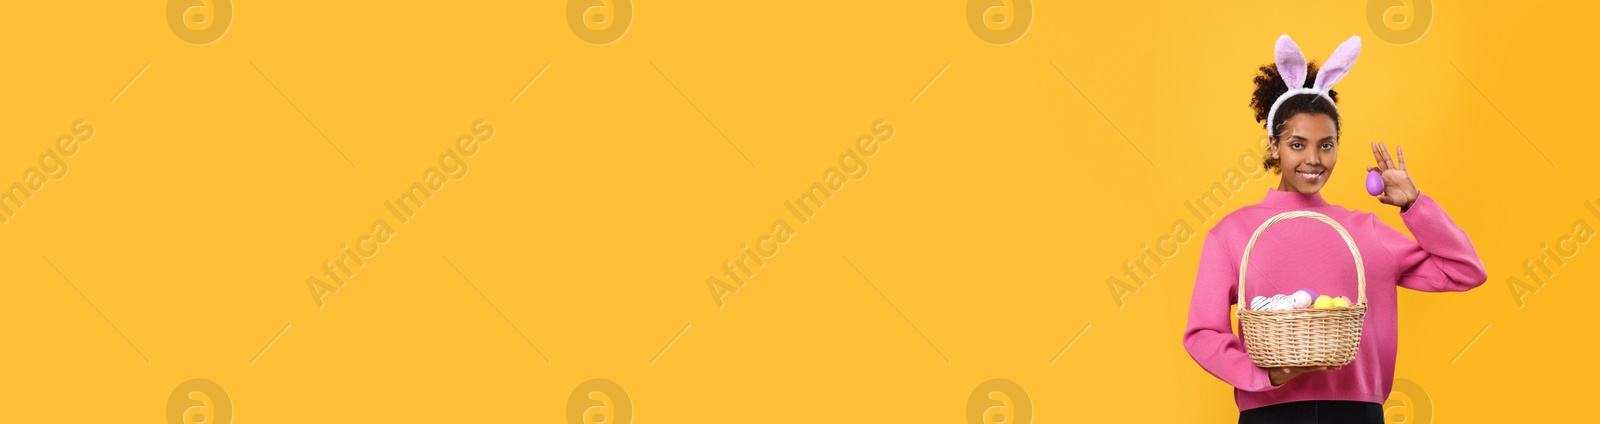 Image of African American woman with bunny ears holding basket full of Easter eggs on orange background, space for text. Banner design